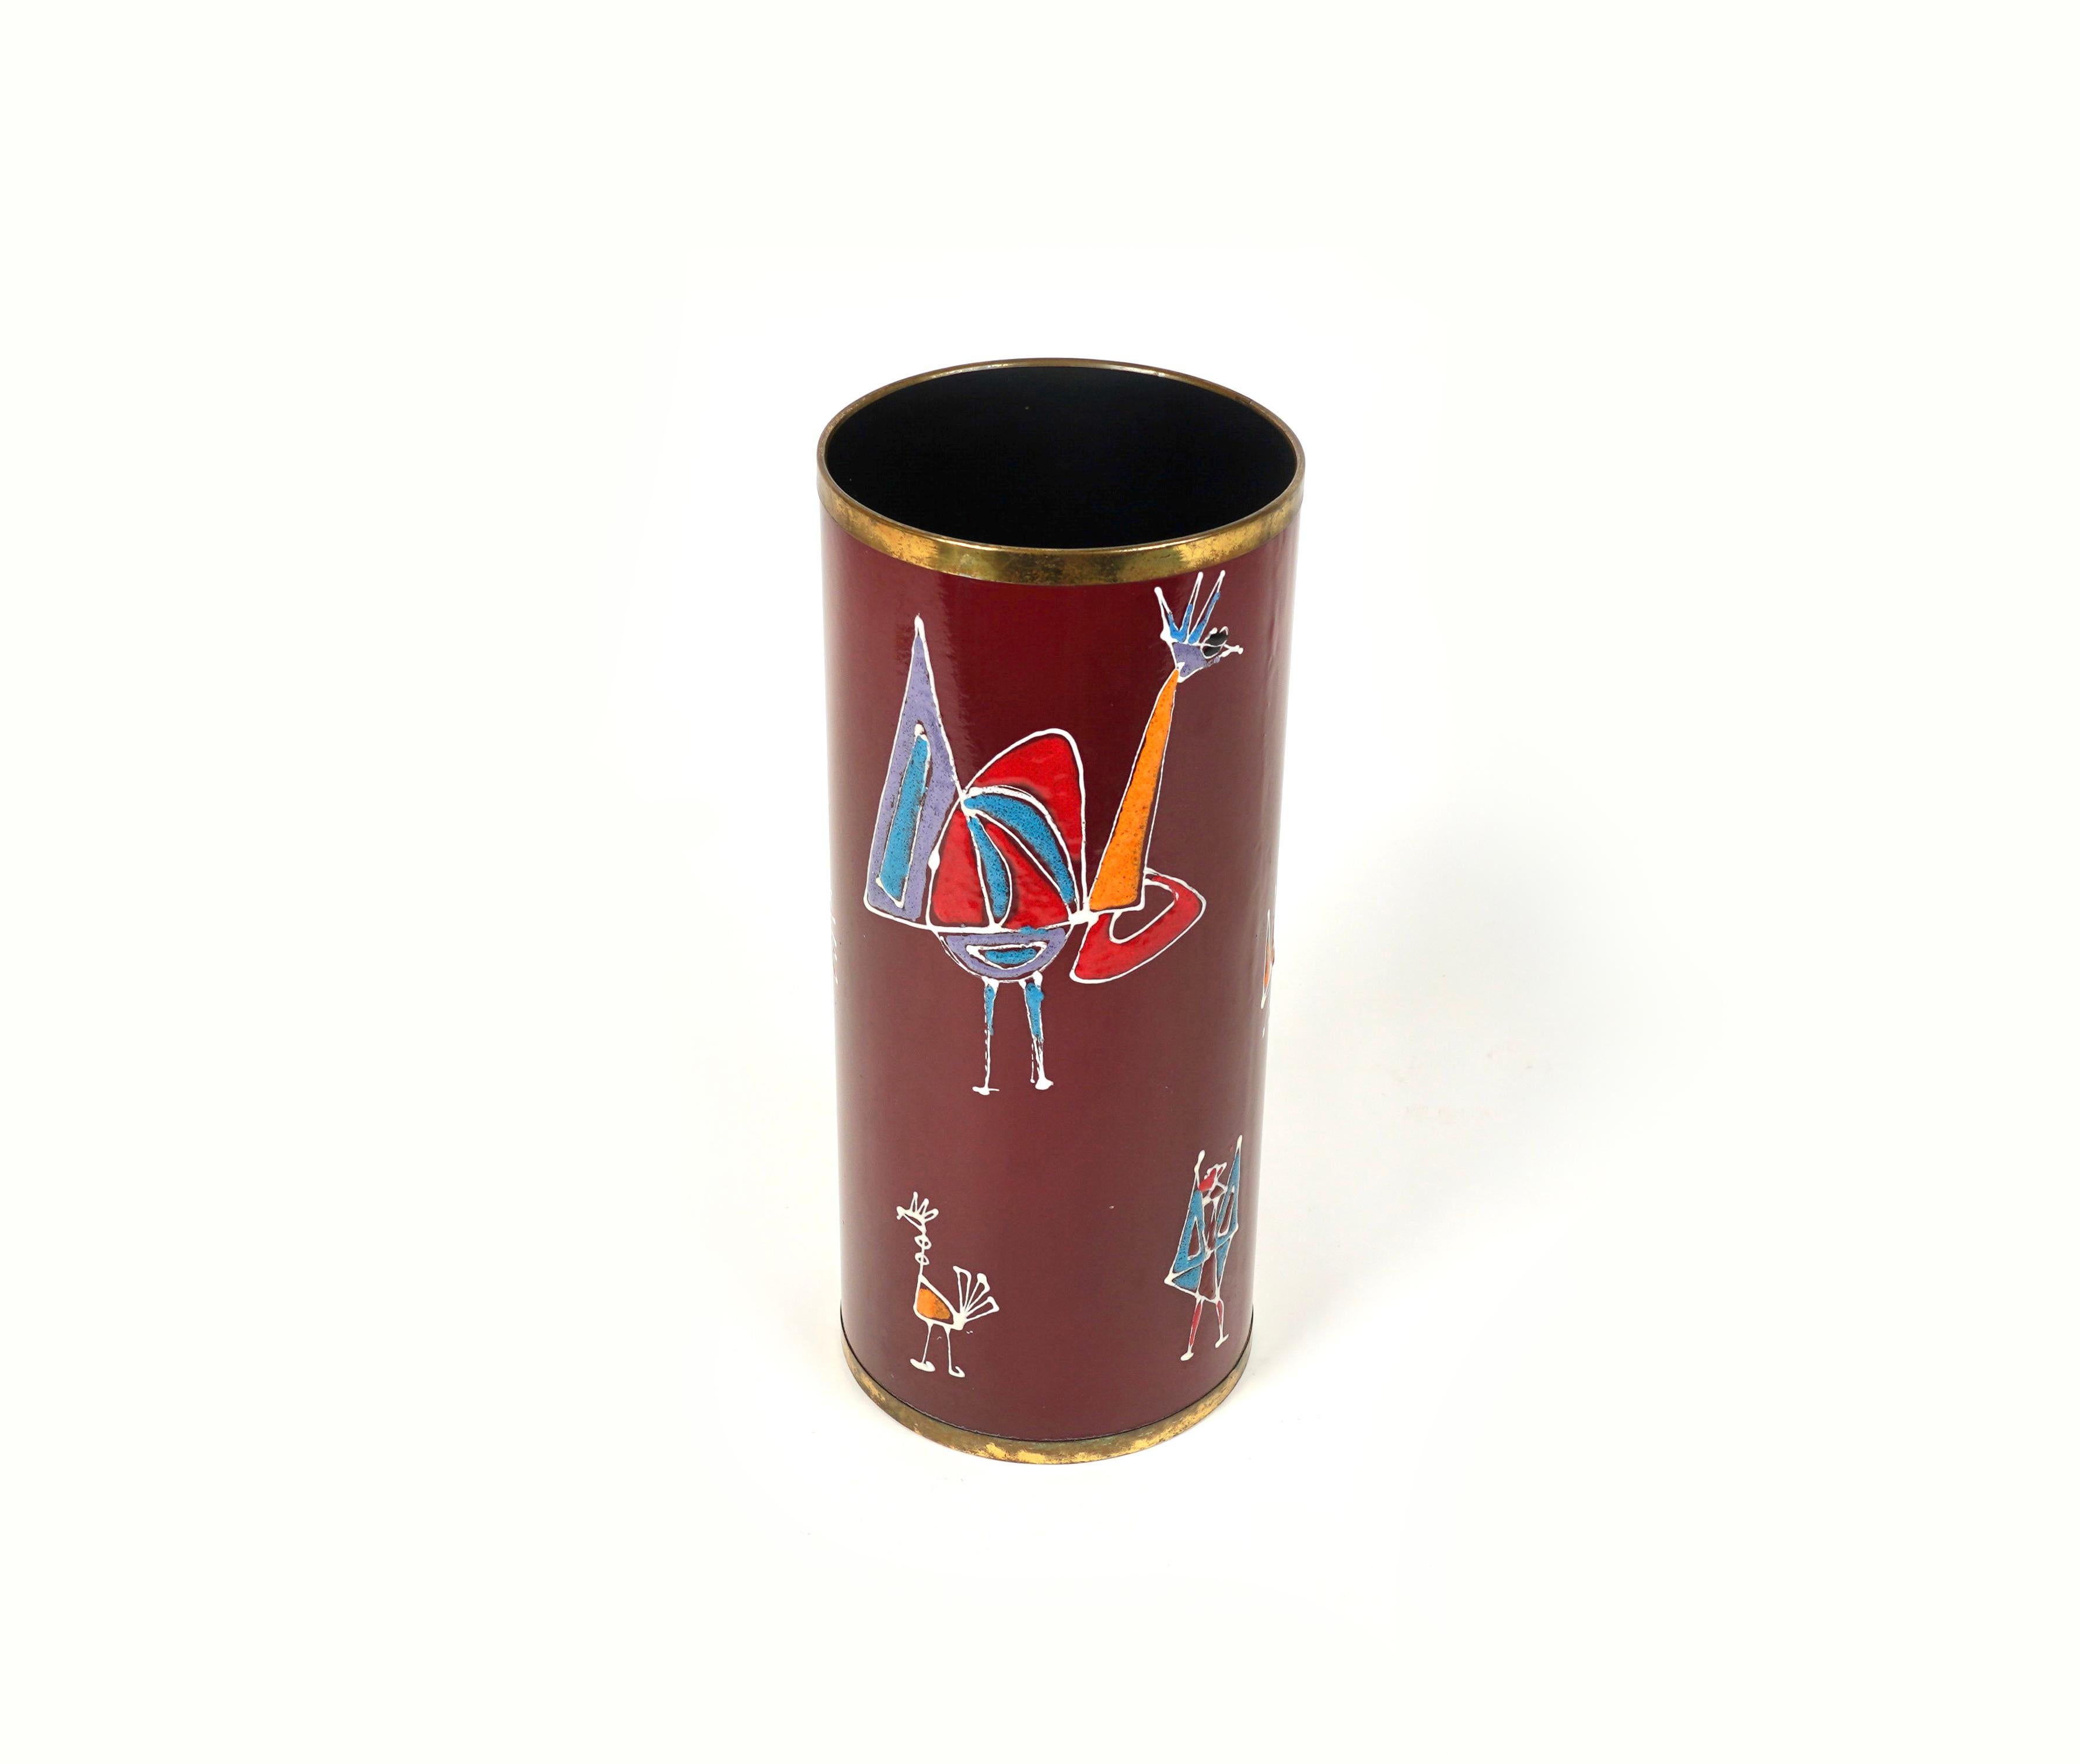 Metal Umbrella Stand in Enamel Iron and Brass by Siva Di Poggibonsi, Italy, 1960s For Sale